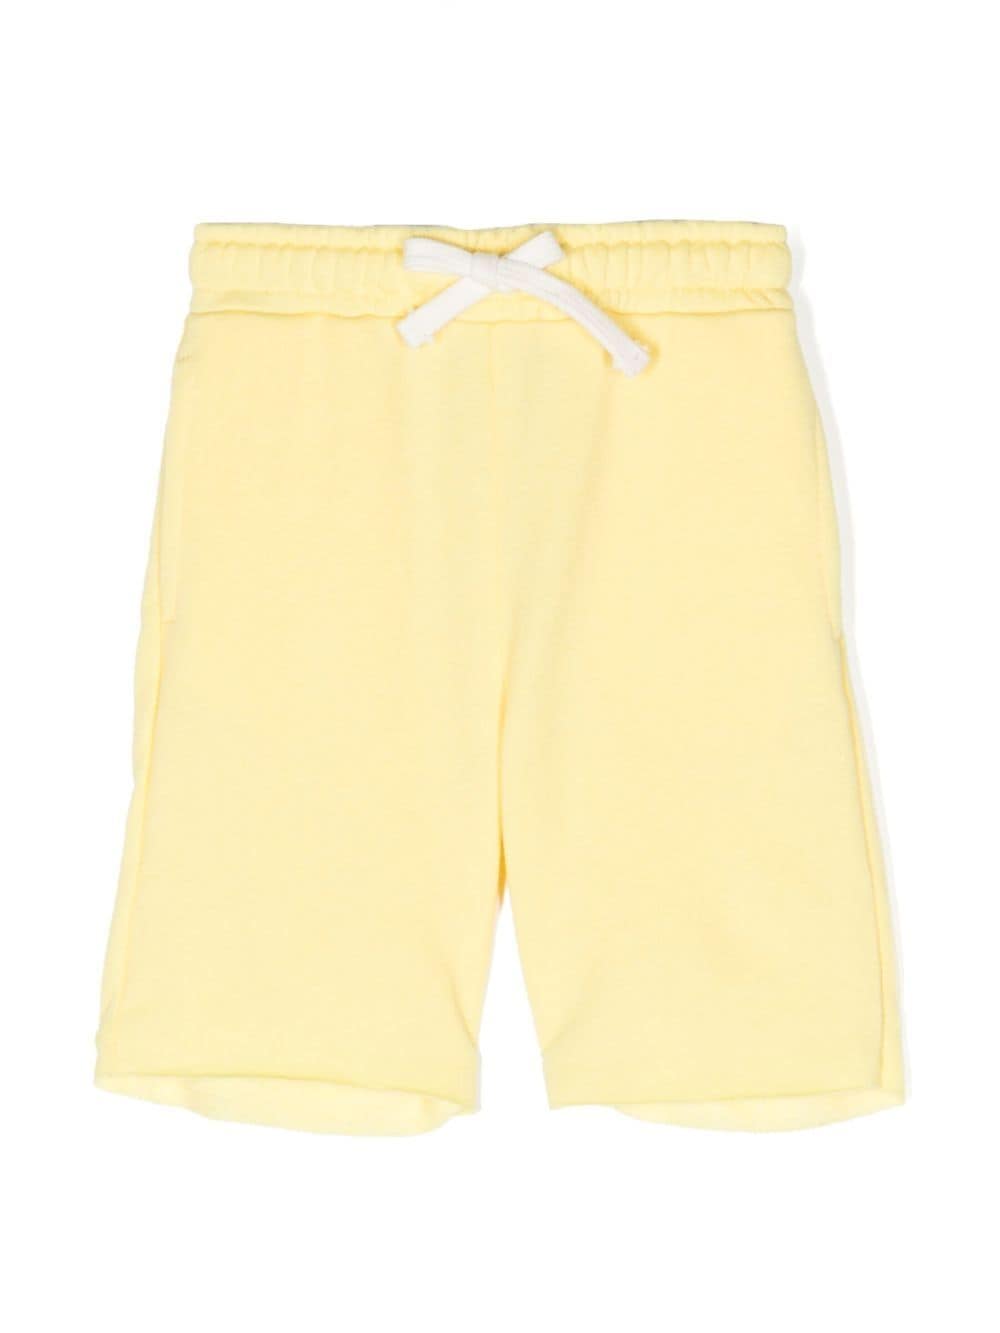 Kindred Kids' Drawstring Pastel Shorts In Yellow